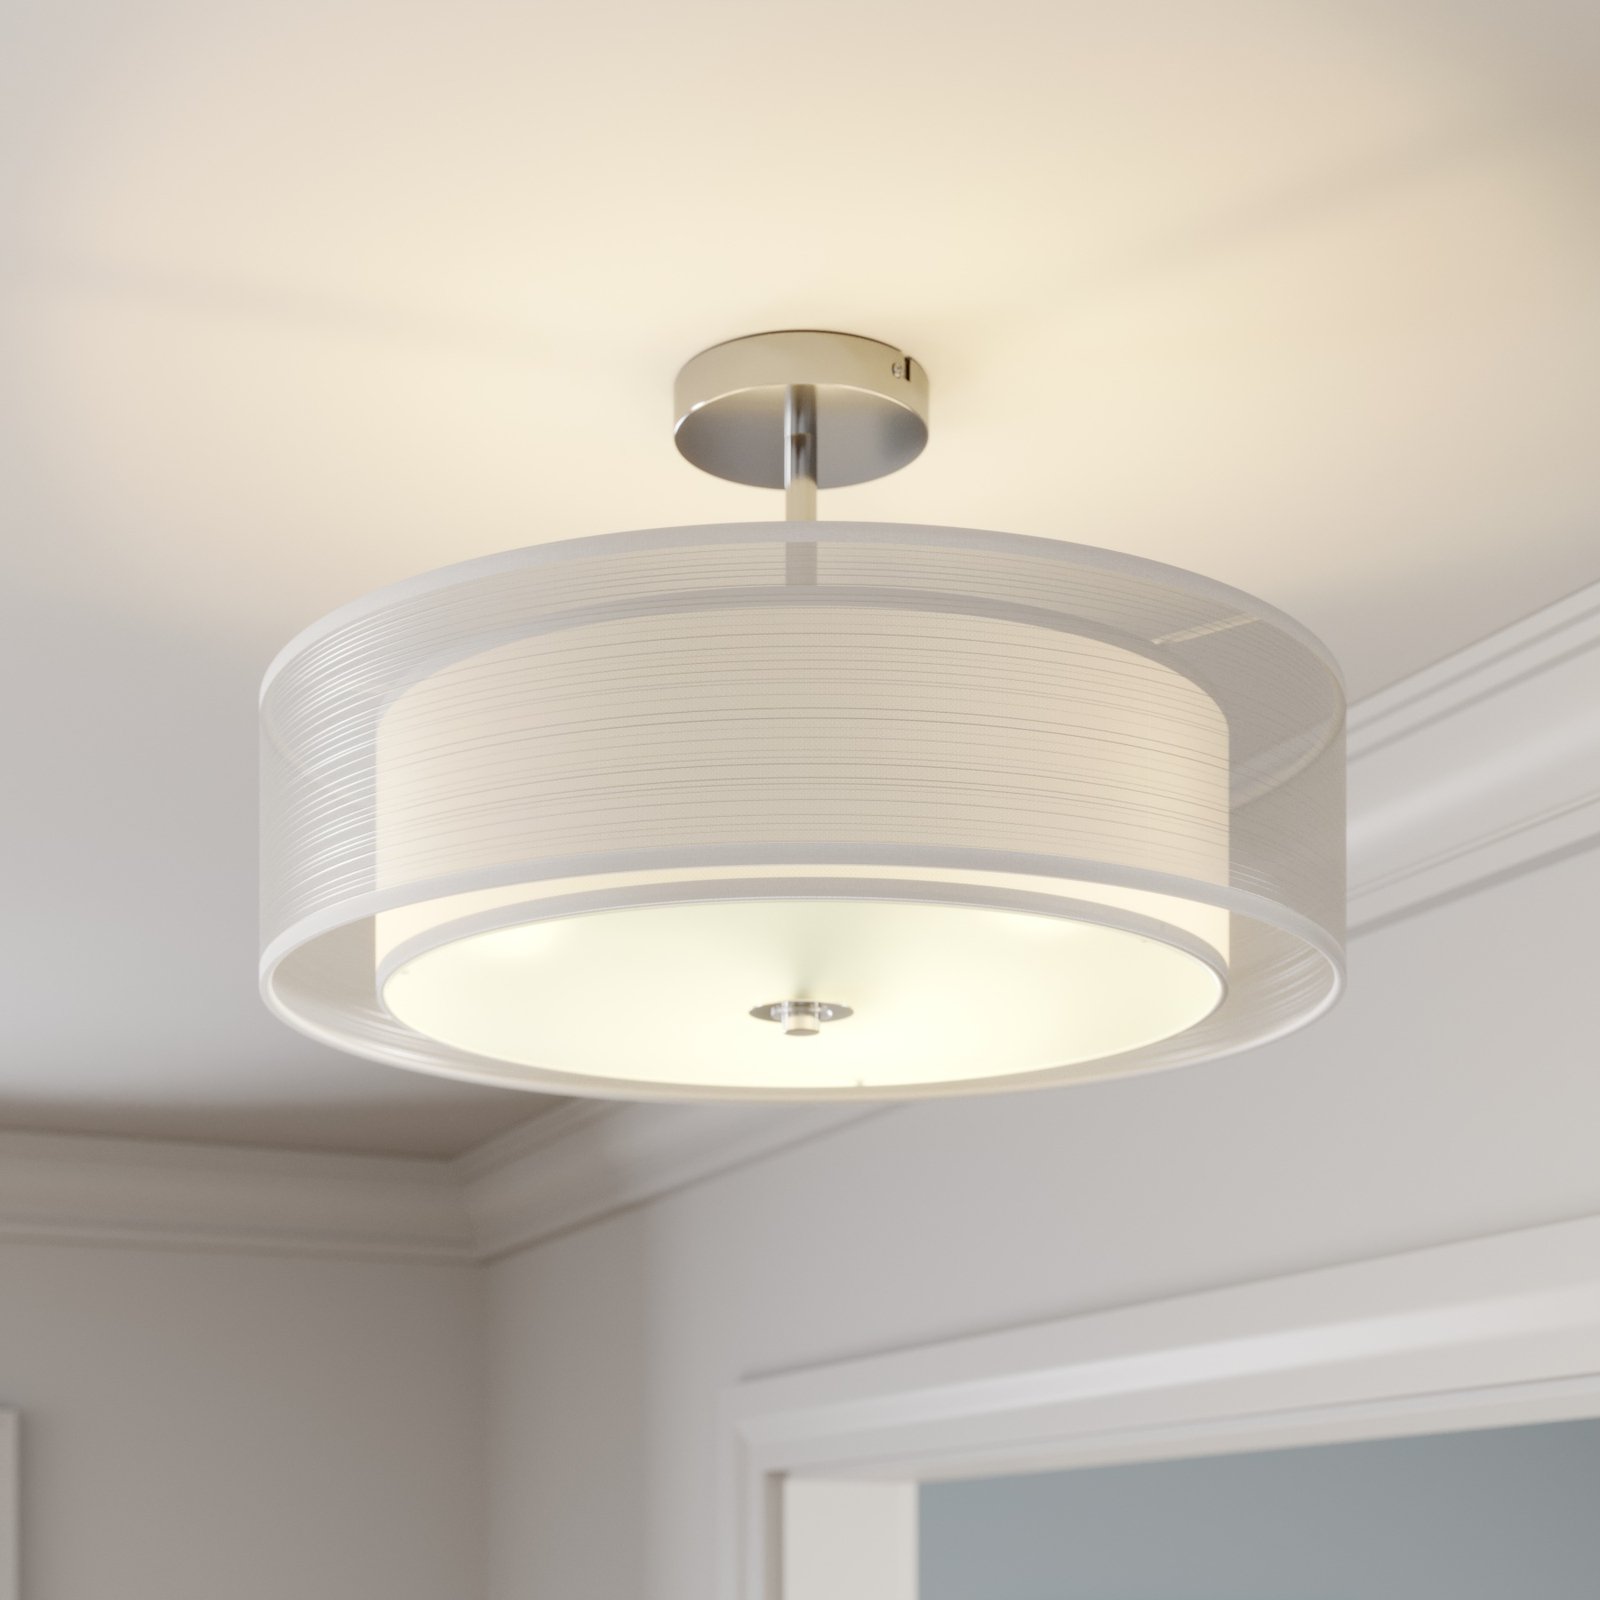 Pikka LED ceiling light with a white lampshade